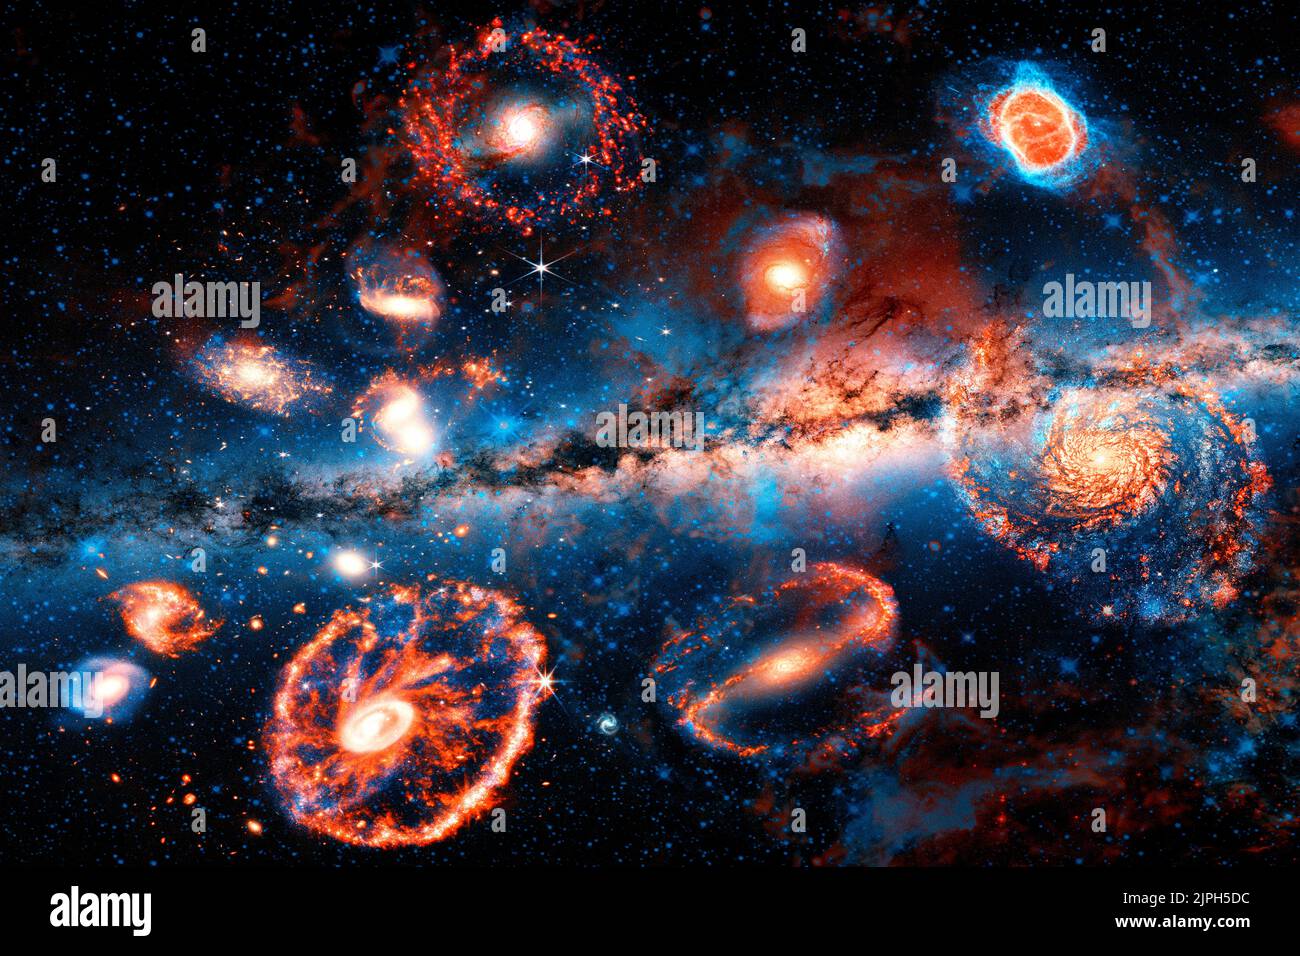 Artist view of the universe and its galaxies Stock Photo